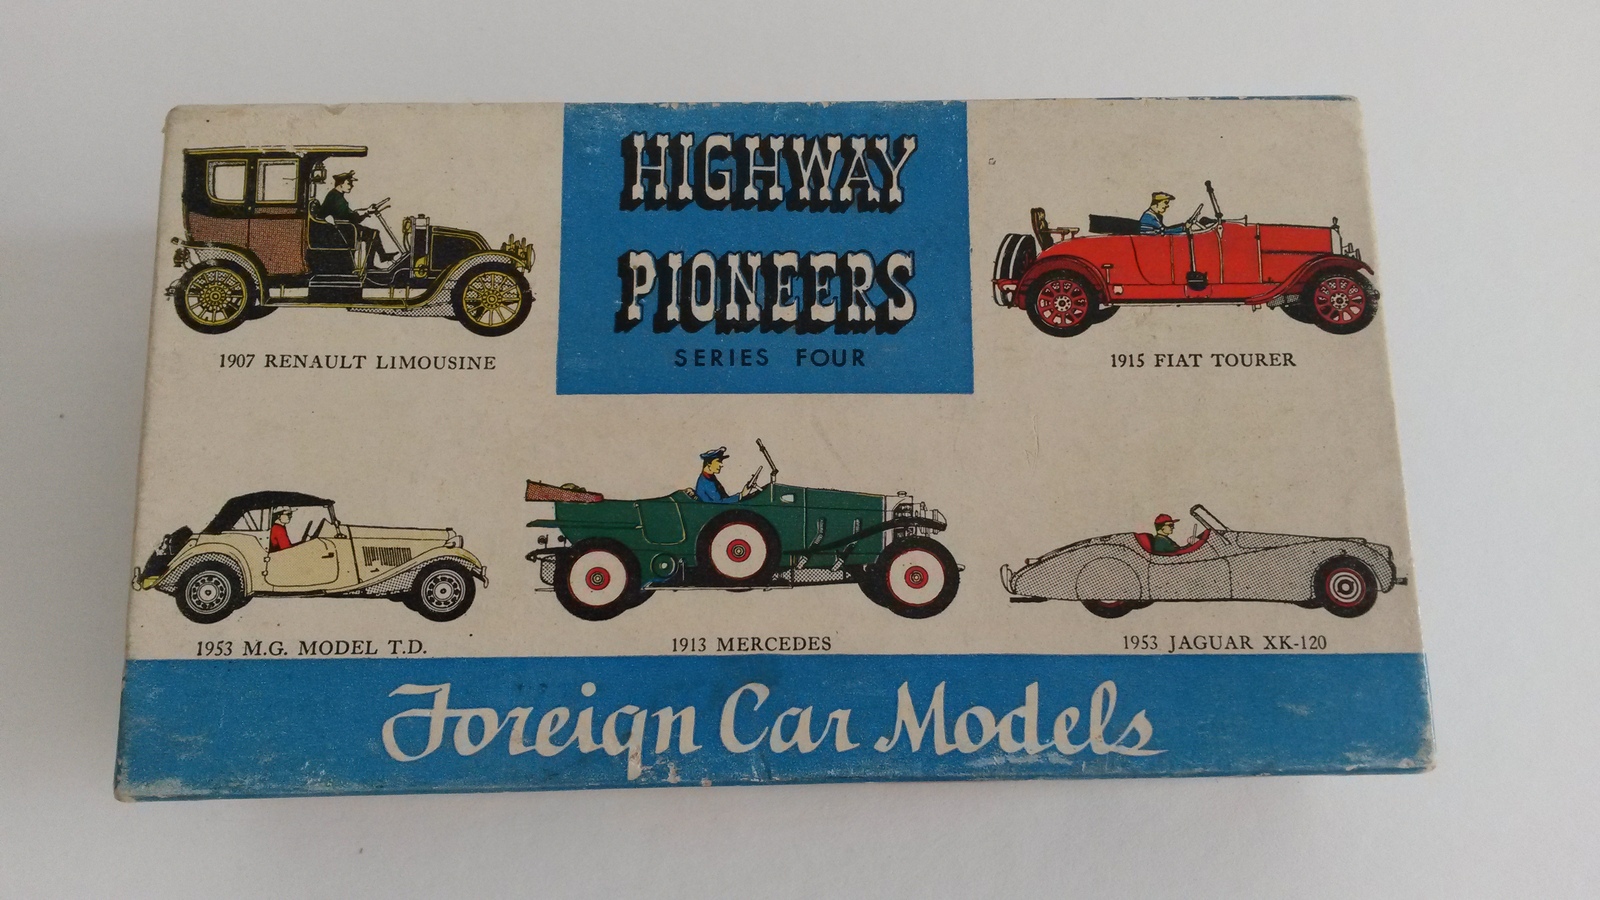 Primary image for  Revell Vintage Model Kit 1907 Renault Limousine Highway Pioneers 